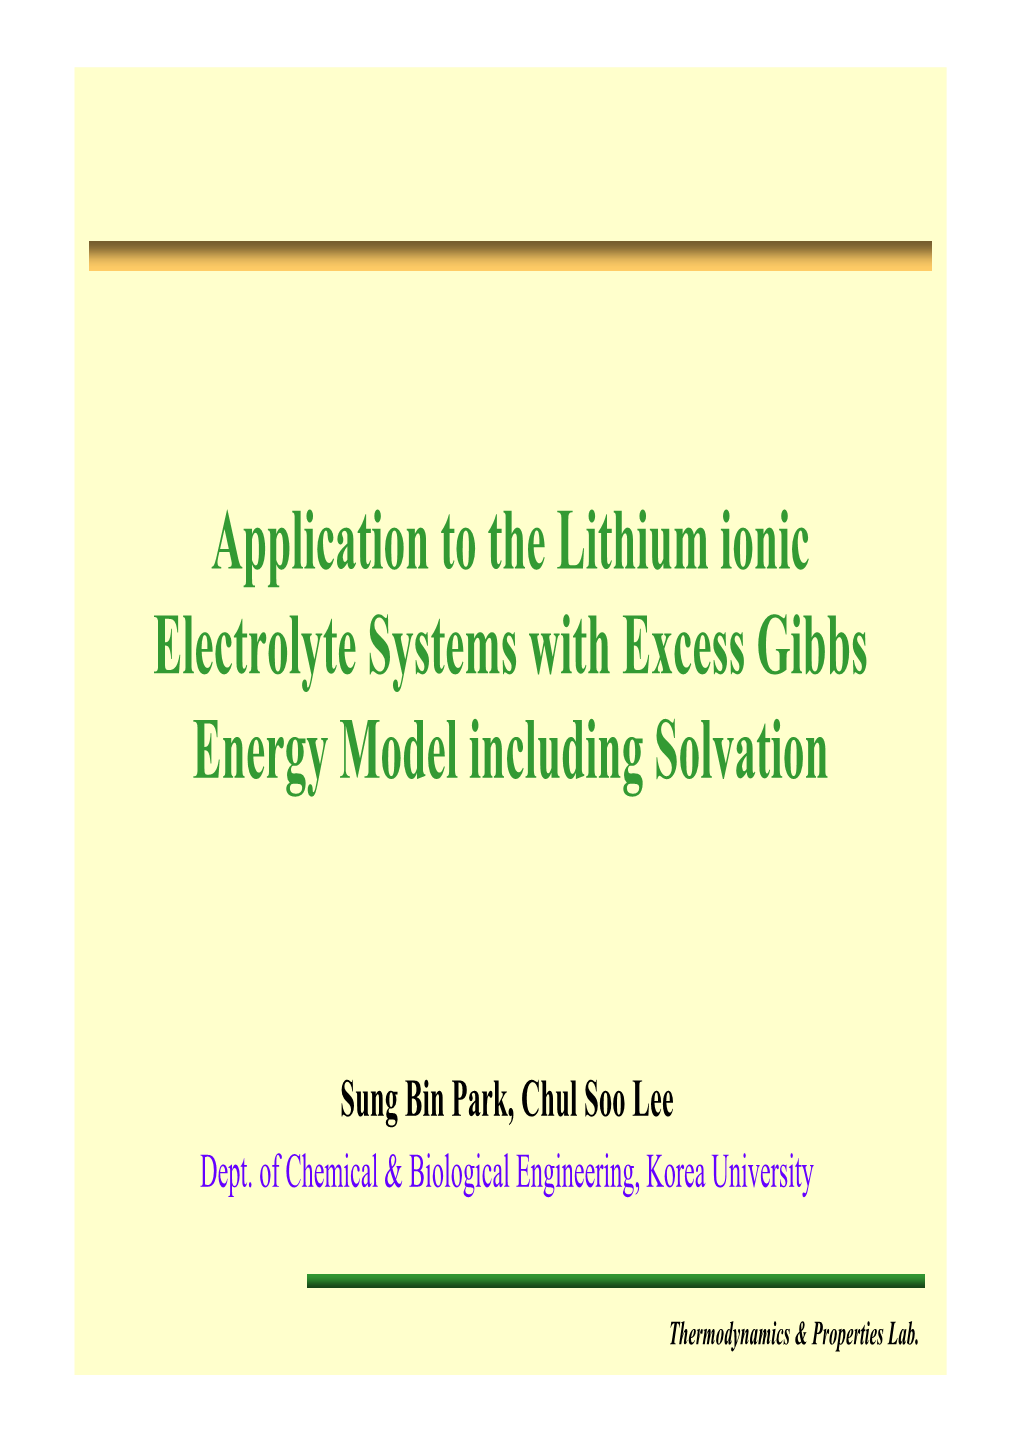 Application to the Lithium Ionic Electrolyte Systems with Excess Gibbs Energy Model Including Solvation